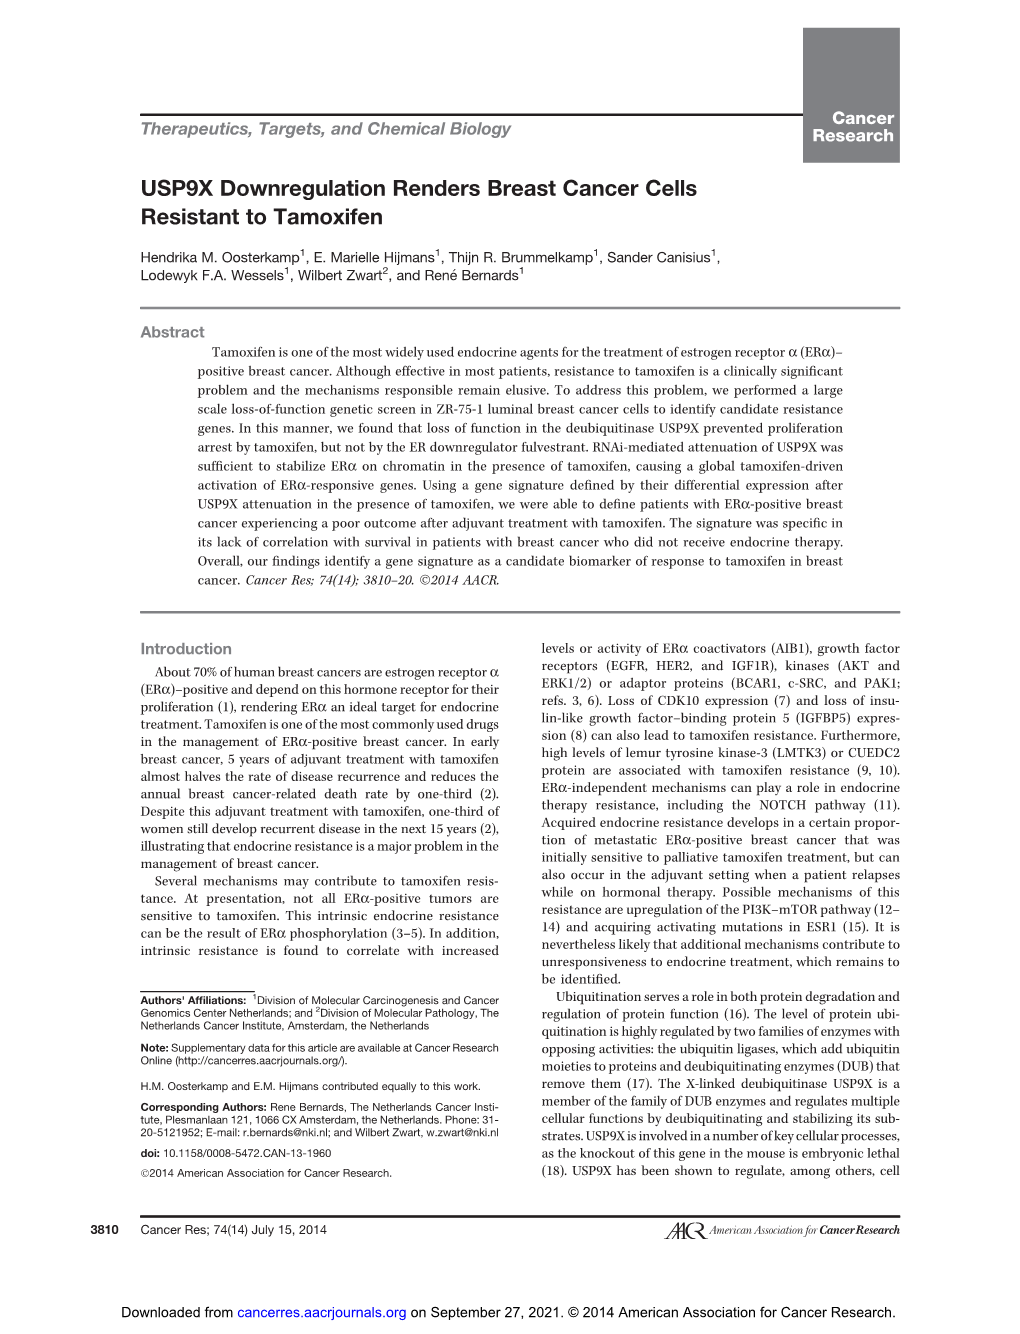 USP9X Downregulation Renders Breast Cancer Cells Resistant to Tamoxifen